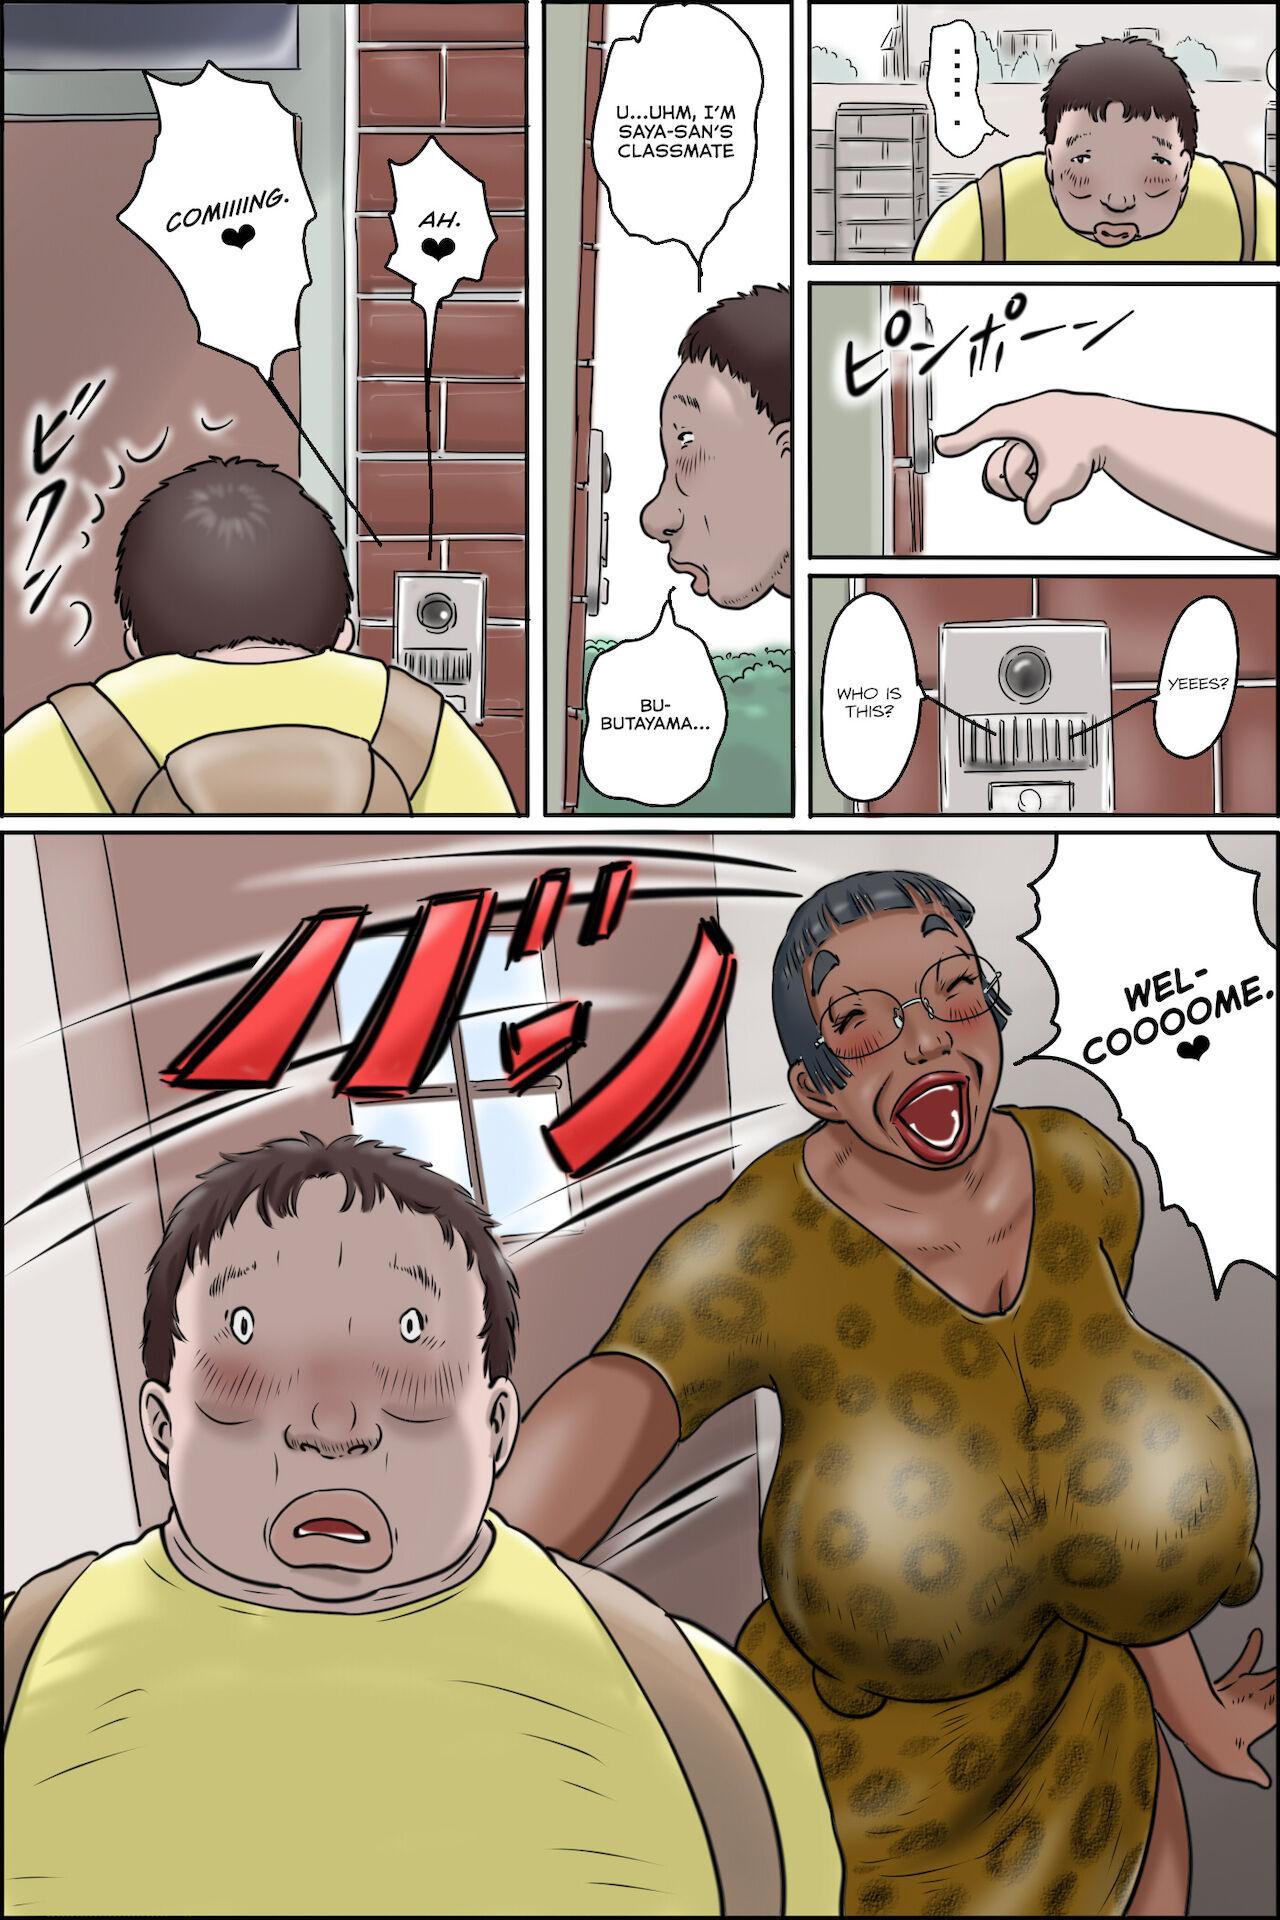 Petera Classmate no Hahaoya ga Yappari Monster | My classmate's mother is definitely a monster - Original Harcore - Page 4